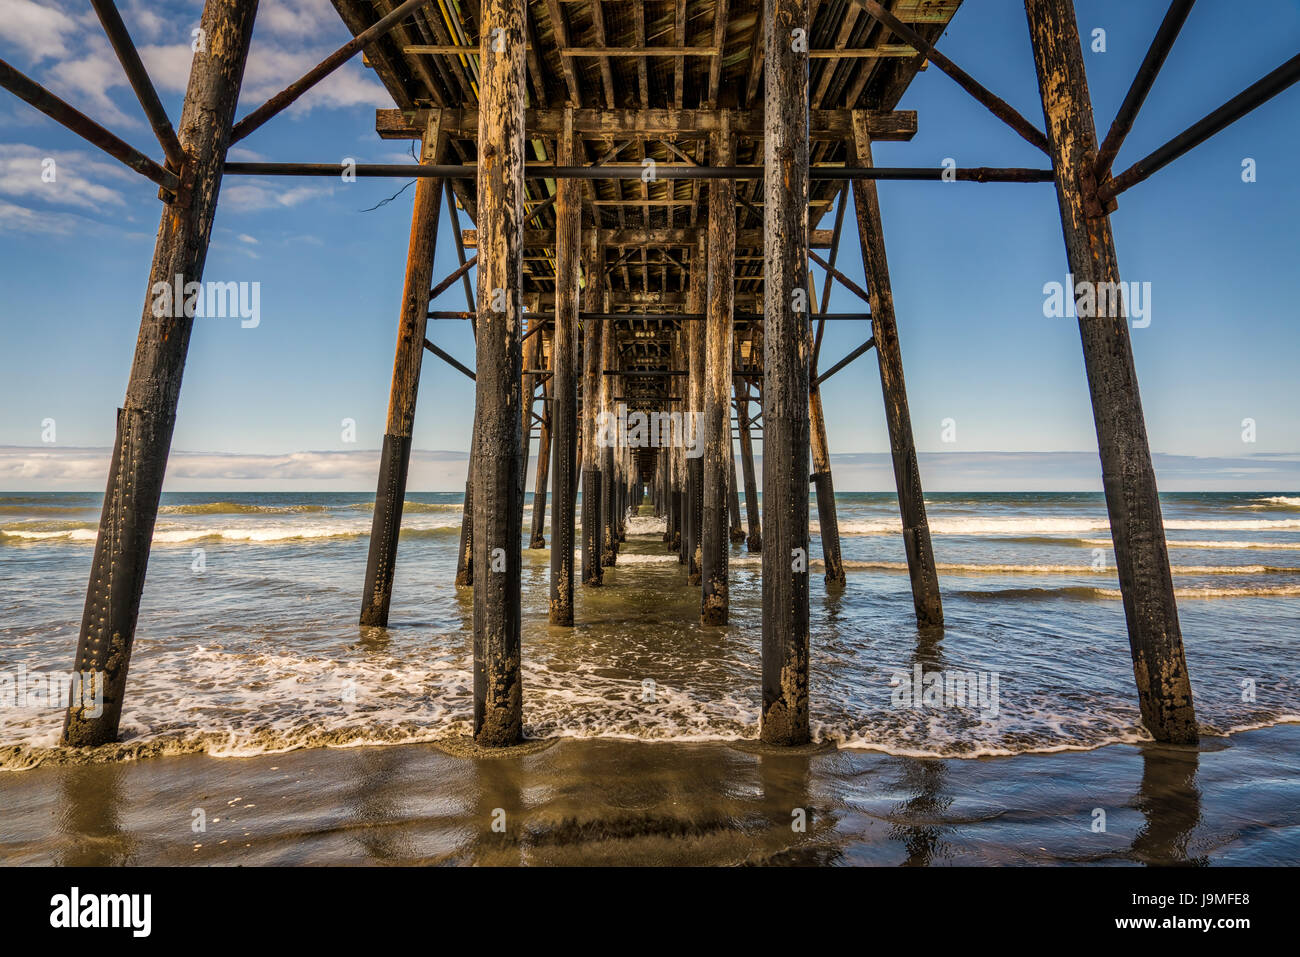 The fishing pier at Oceanside, California. Stock Photo